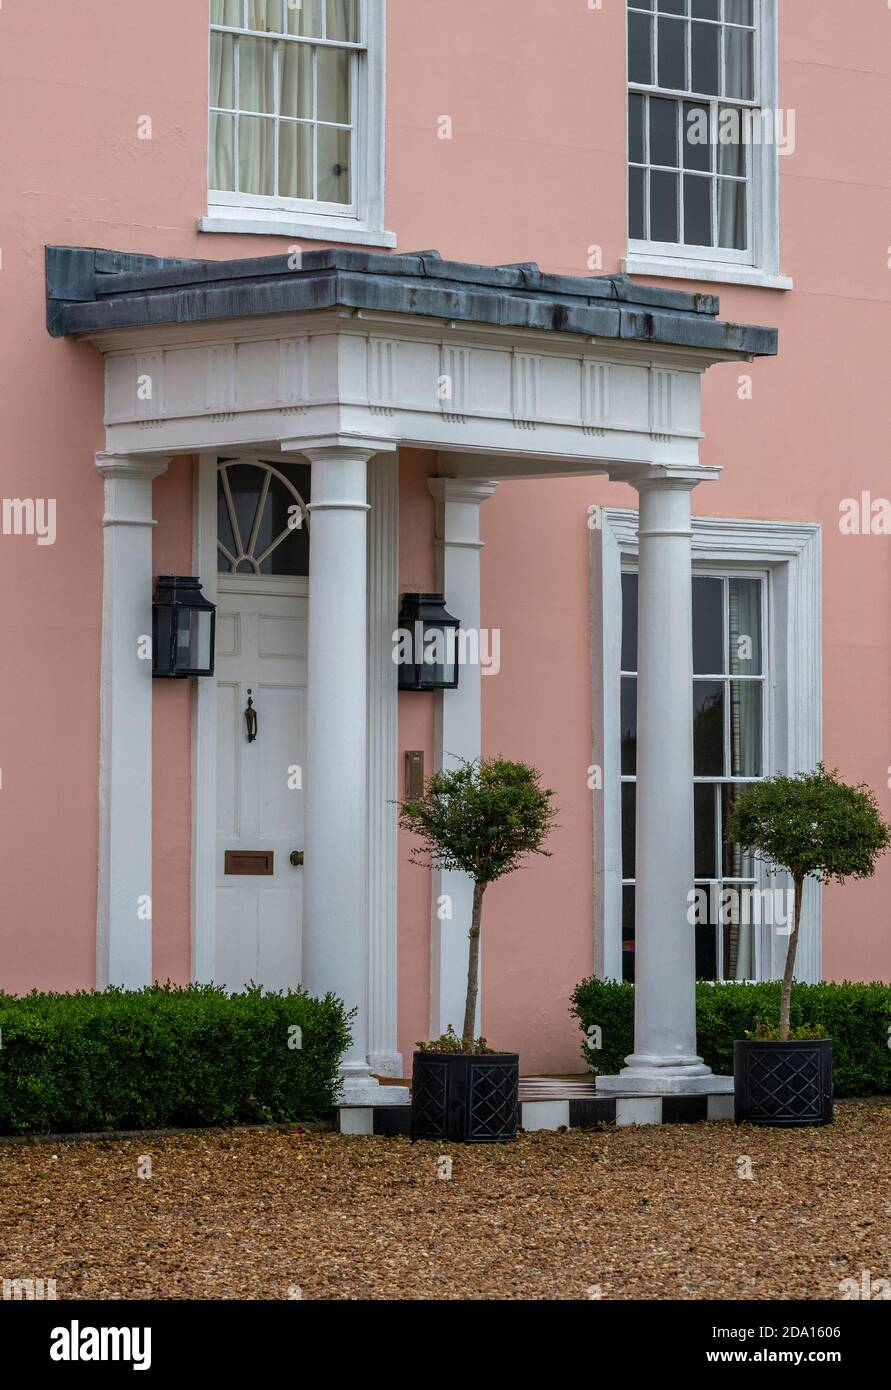 a traditional georgian front door and canopy with corinthian column holding a porch over the entrance Stock Photo